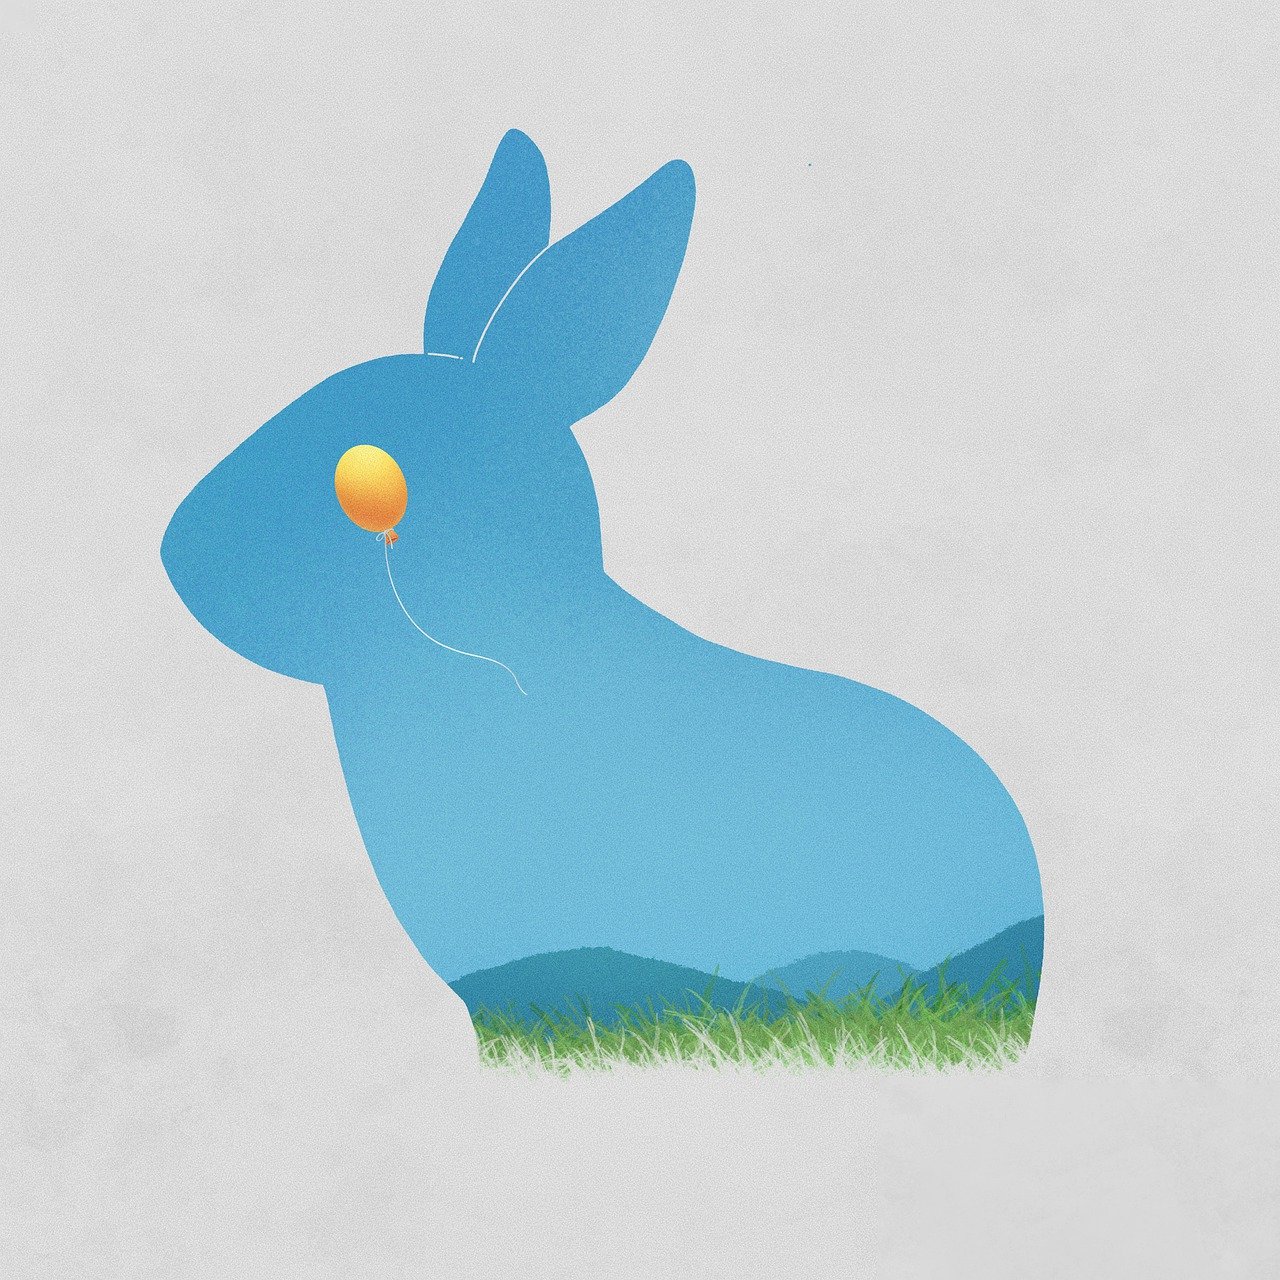 a rabbit that is sitting in the grass, an illustration of, inspired by Quint Buchholz, shutterstock contest winner, conceptual art, dribbble illustration, egg, mountainside, sapphire